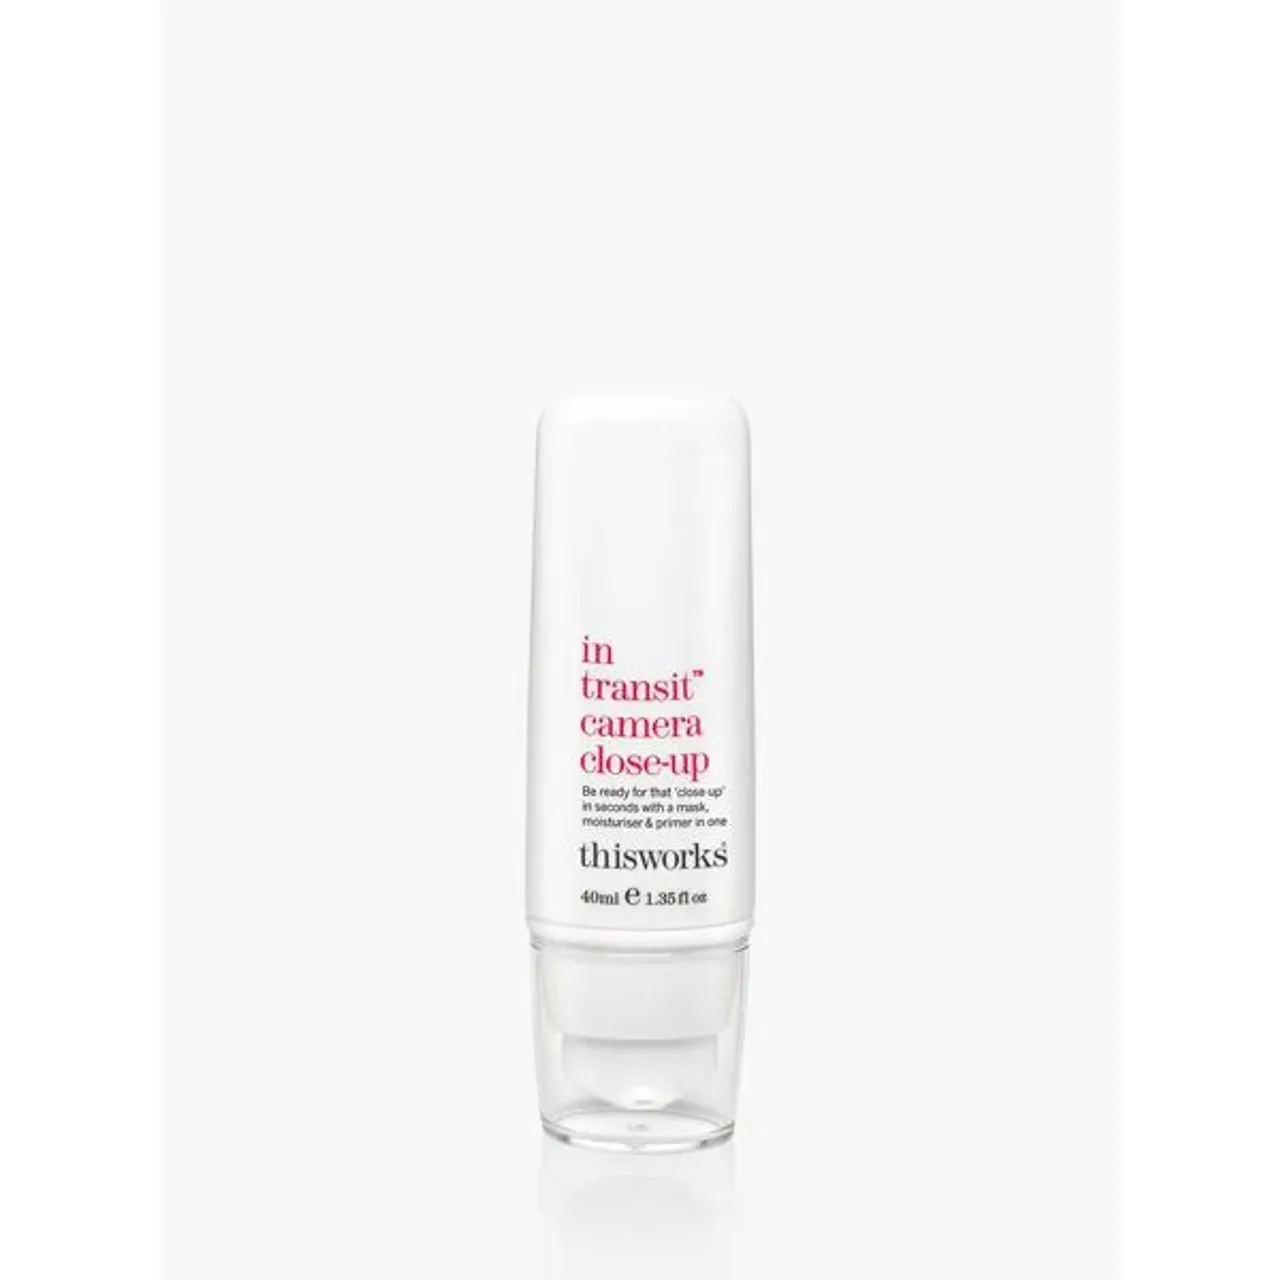 This Works In Transit Camera Close-Up, 40ml - Unisex - Size: 40ml